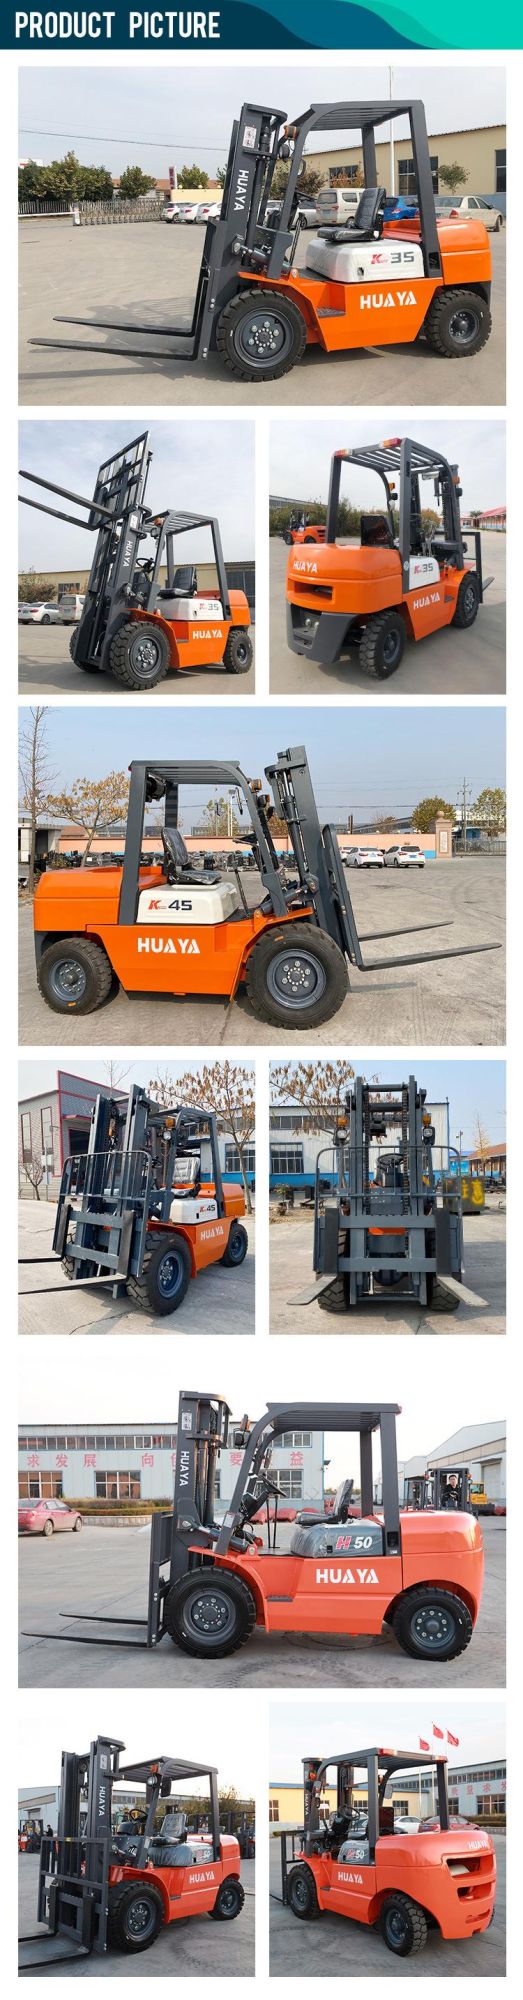 Huaya China Cheap Brand New Diesel 4 Ton Forklift Price with Good Fd40